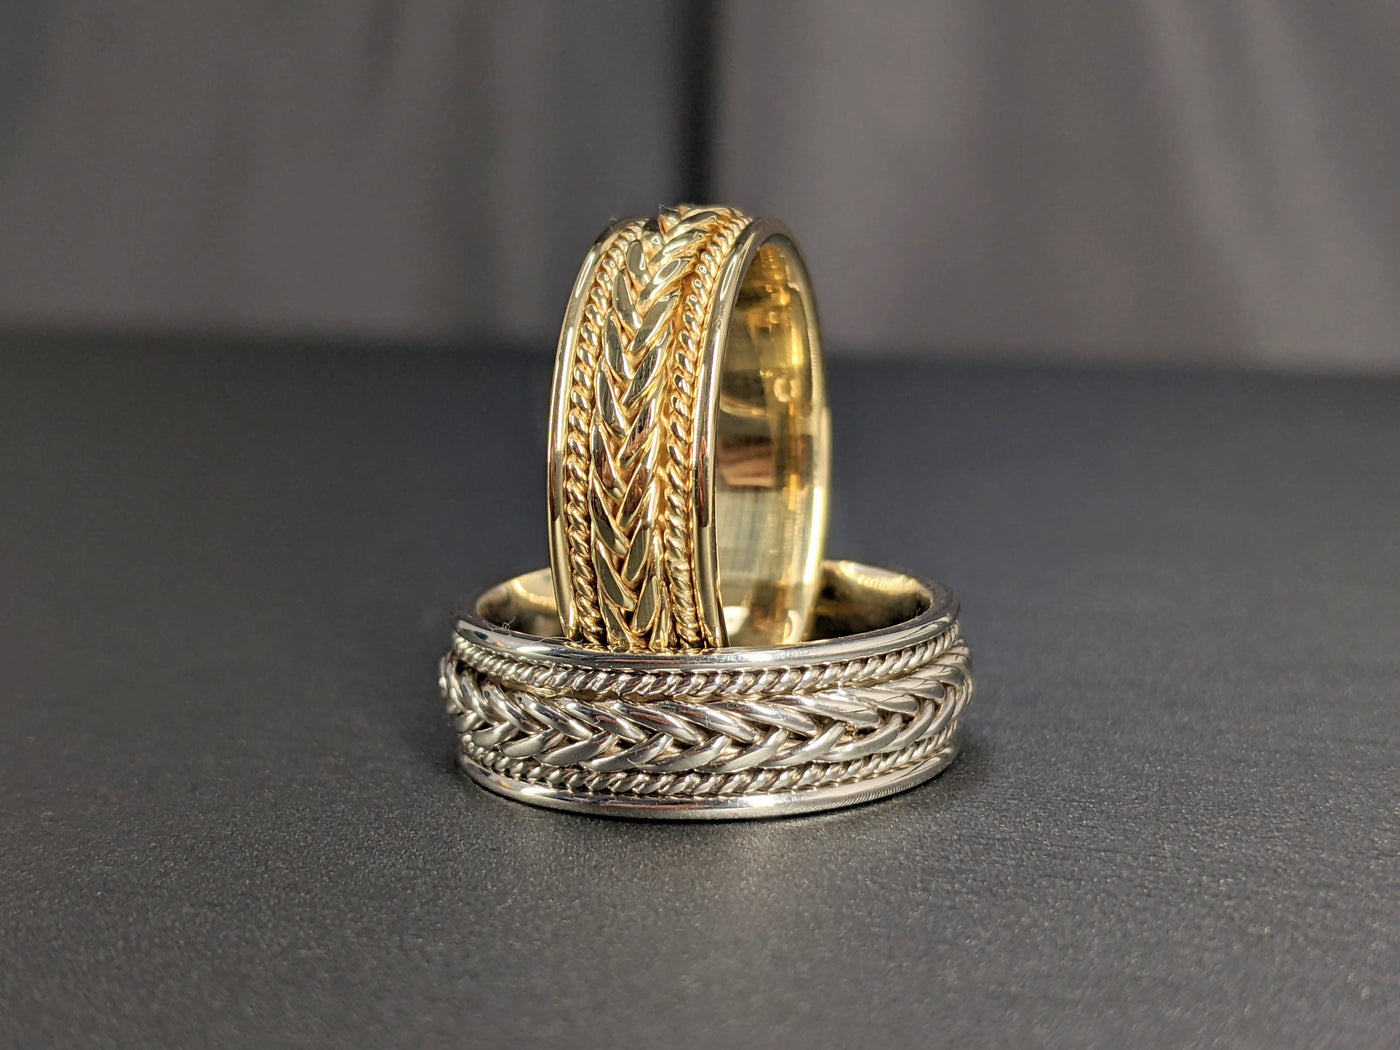 Solid Gold 7MM Hand Braided Wedding Band